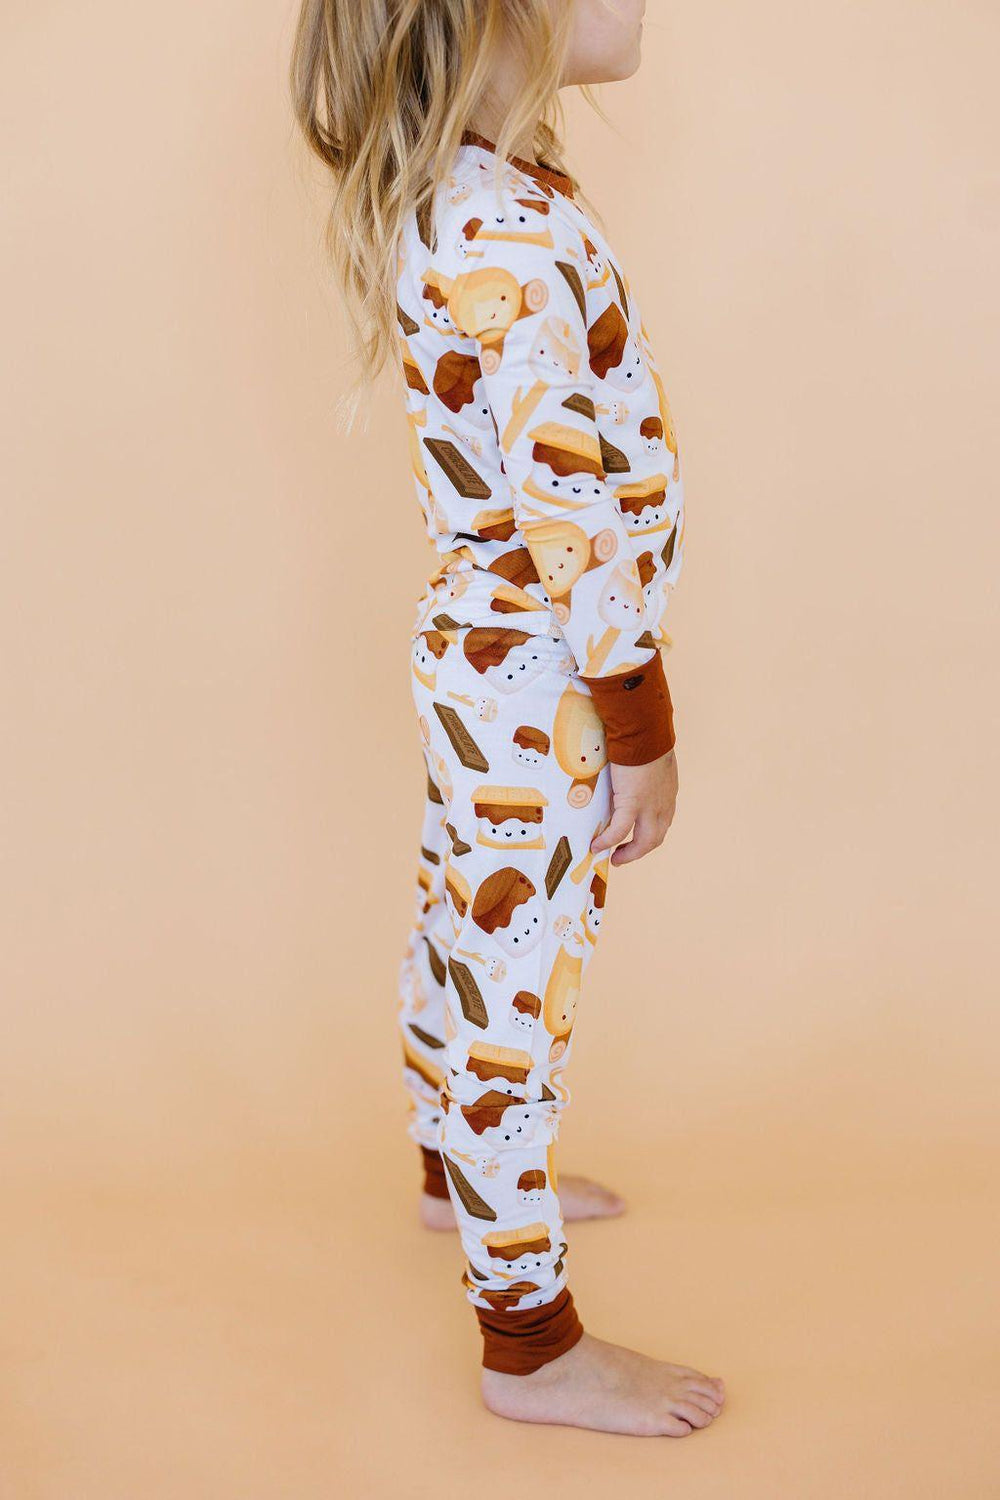 S'mores Print Bamboo Kids Pajama Set - Two Piece - Sophia Rose Children's Boutique